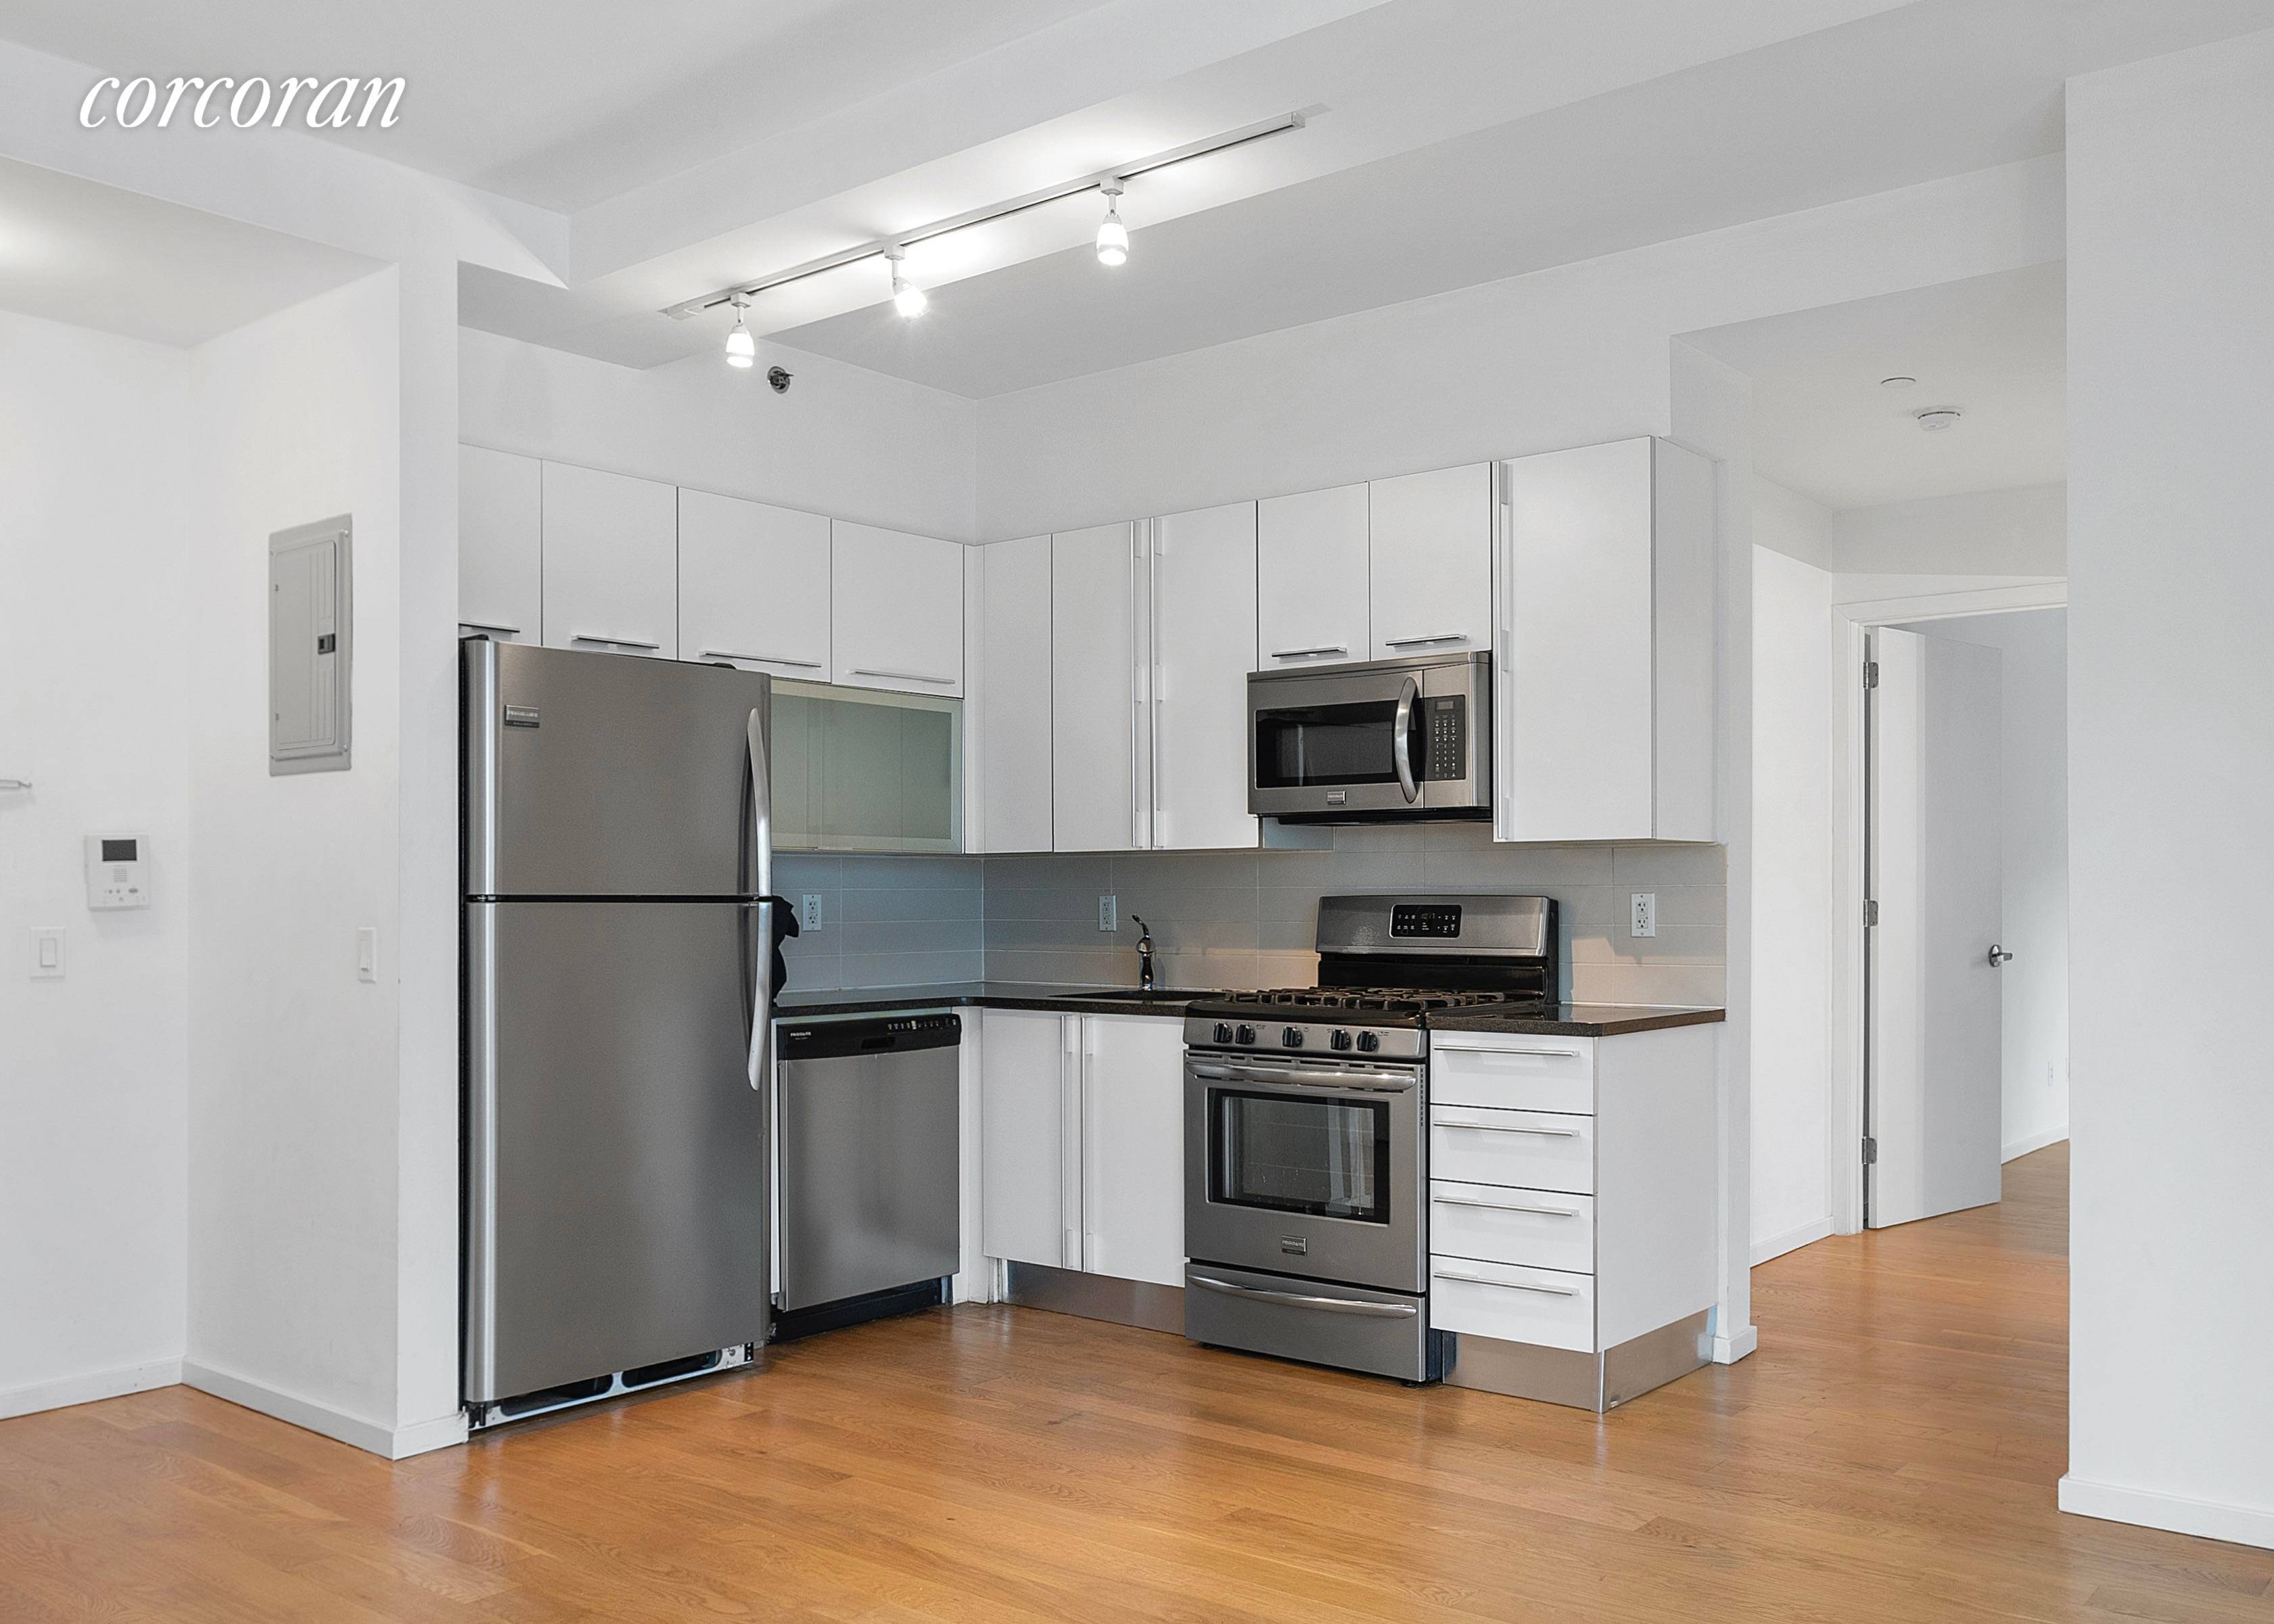 NEW ! Highly coveted high floor 2 bed 2 bath with private outdoor terrace now available !